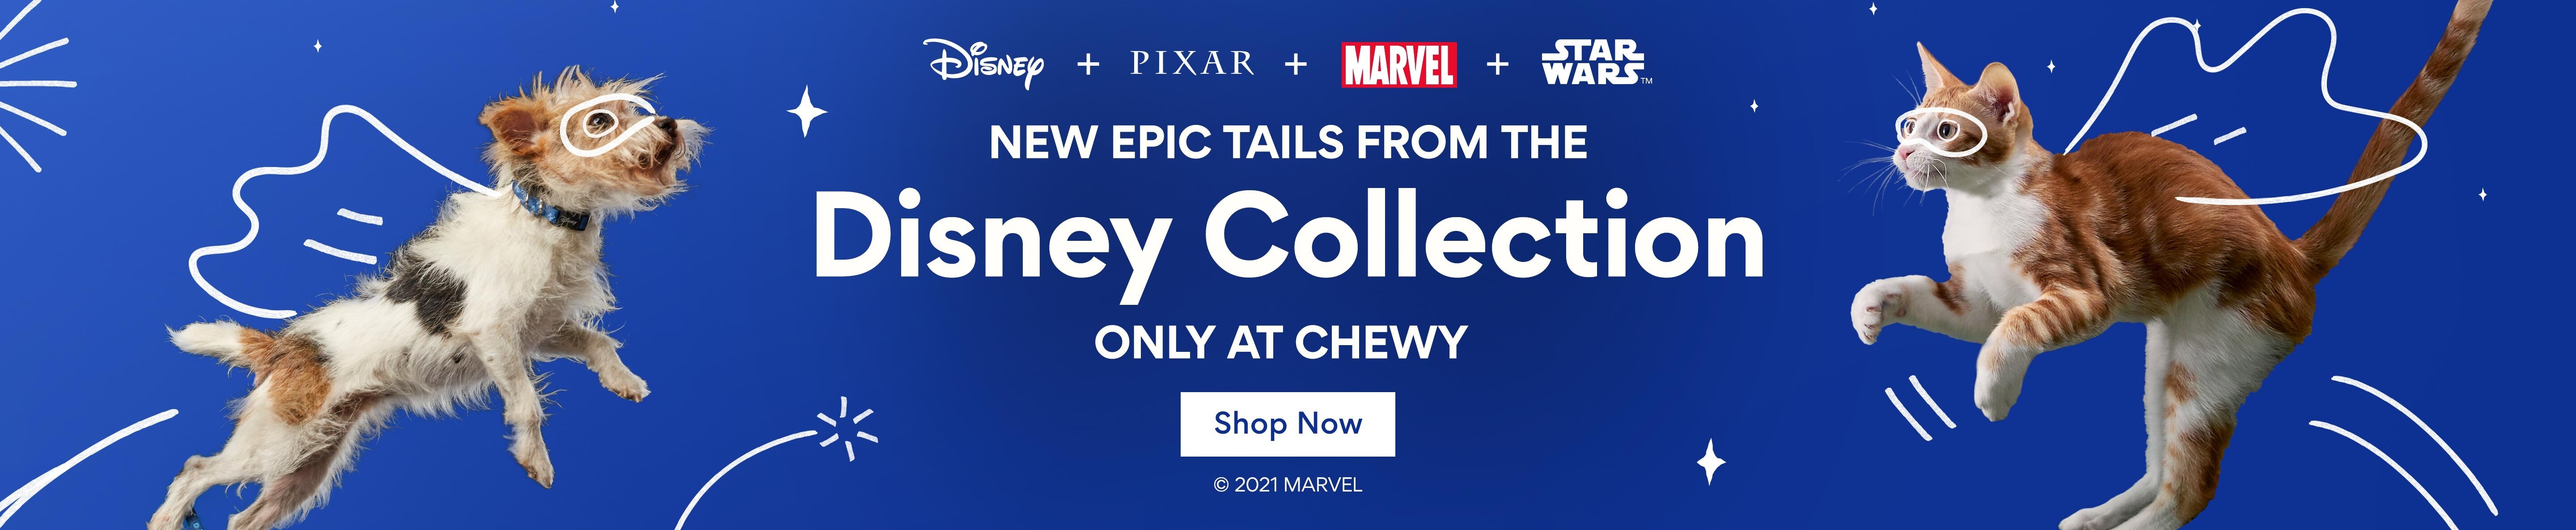 New epic tails from the Disney Collection only at Chewy